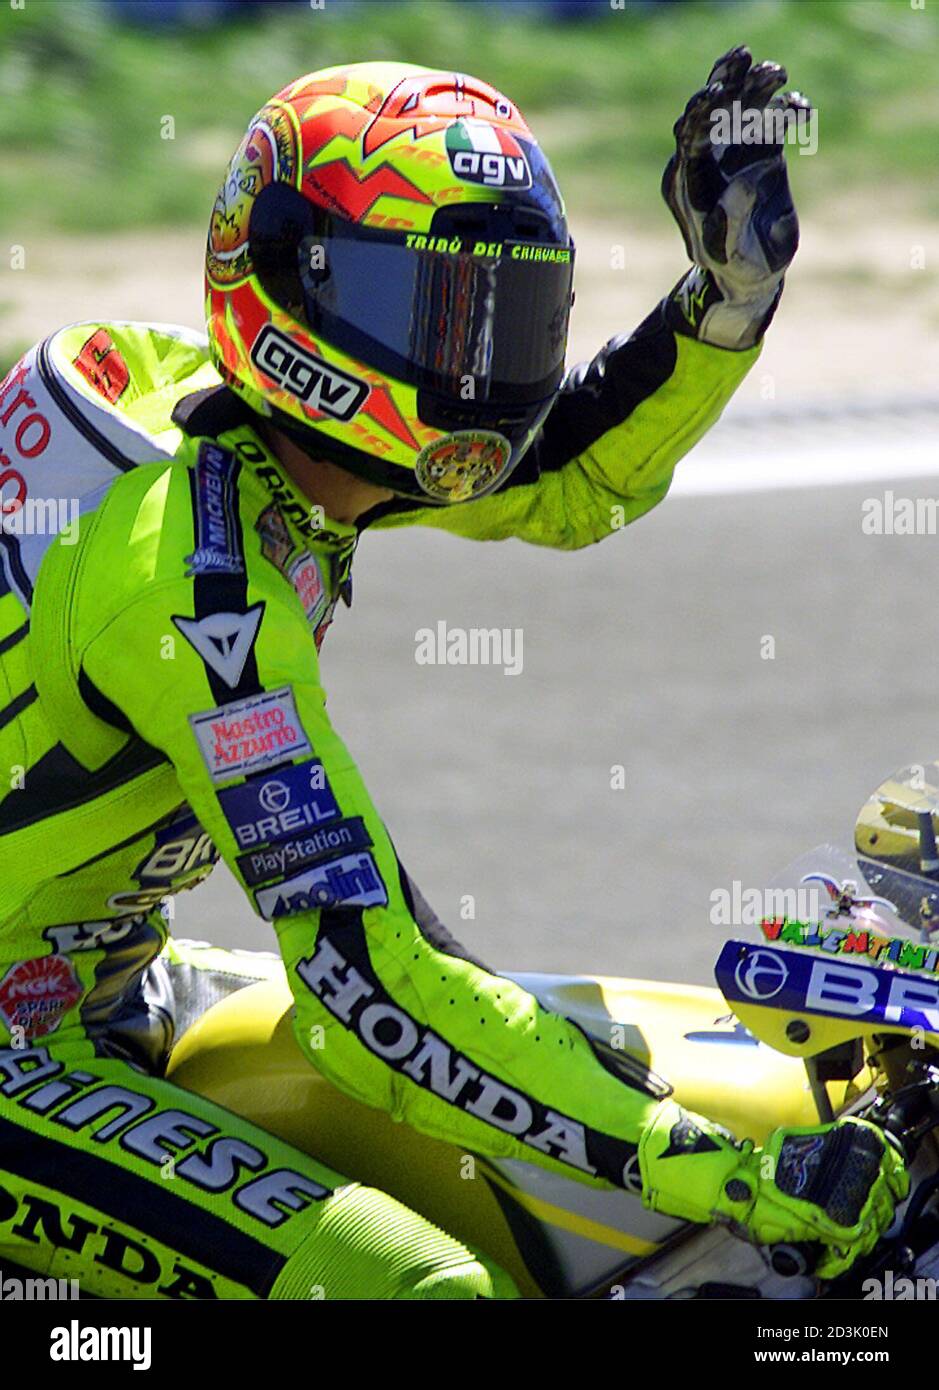 Italian 500cc rider Valentino Rossi rides waving after setting the third  position at the Estoril Grand Prix September 3, 2000. Valentino Rossi set  the third place in a time of 48 minutes